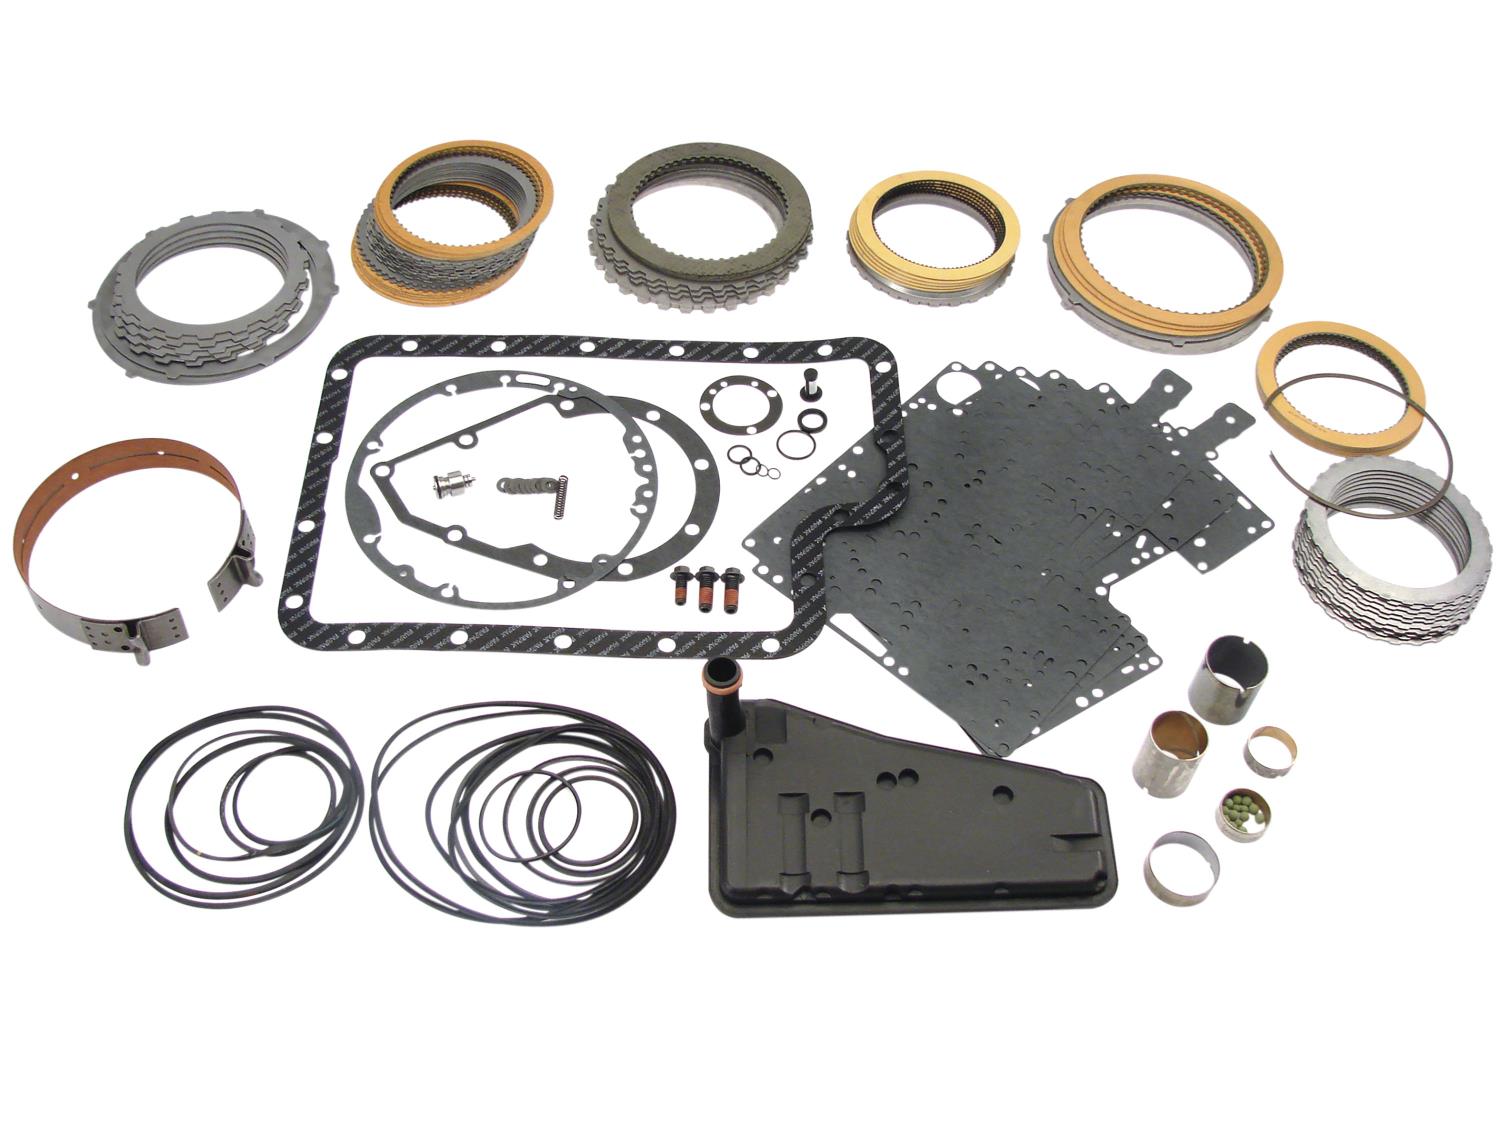 Transmission Master Racing Overhaul Kit 1997-98 Ford E40D/4R100 4WD